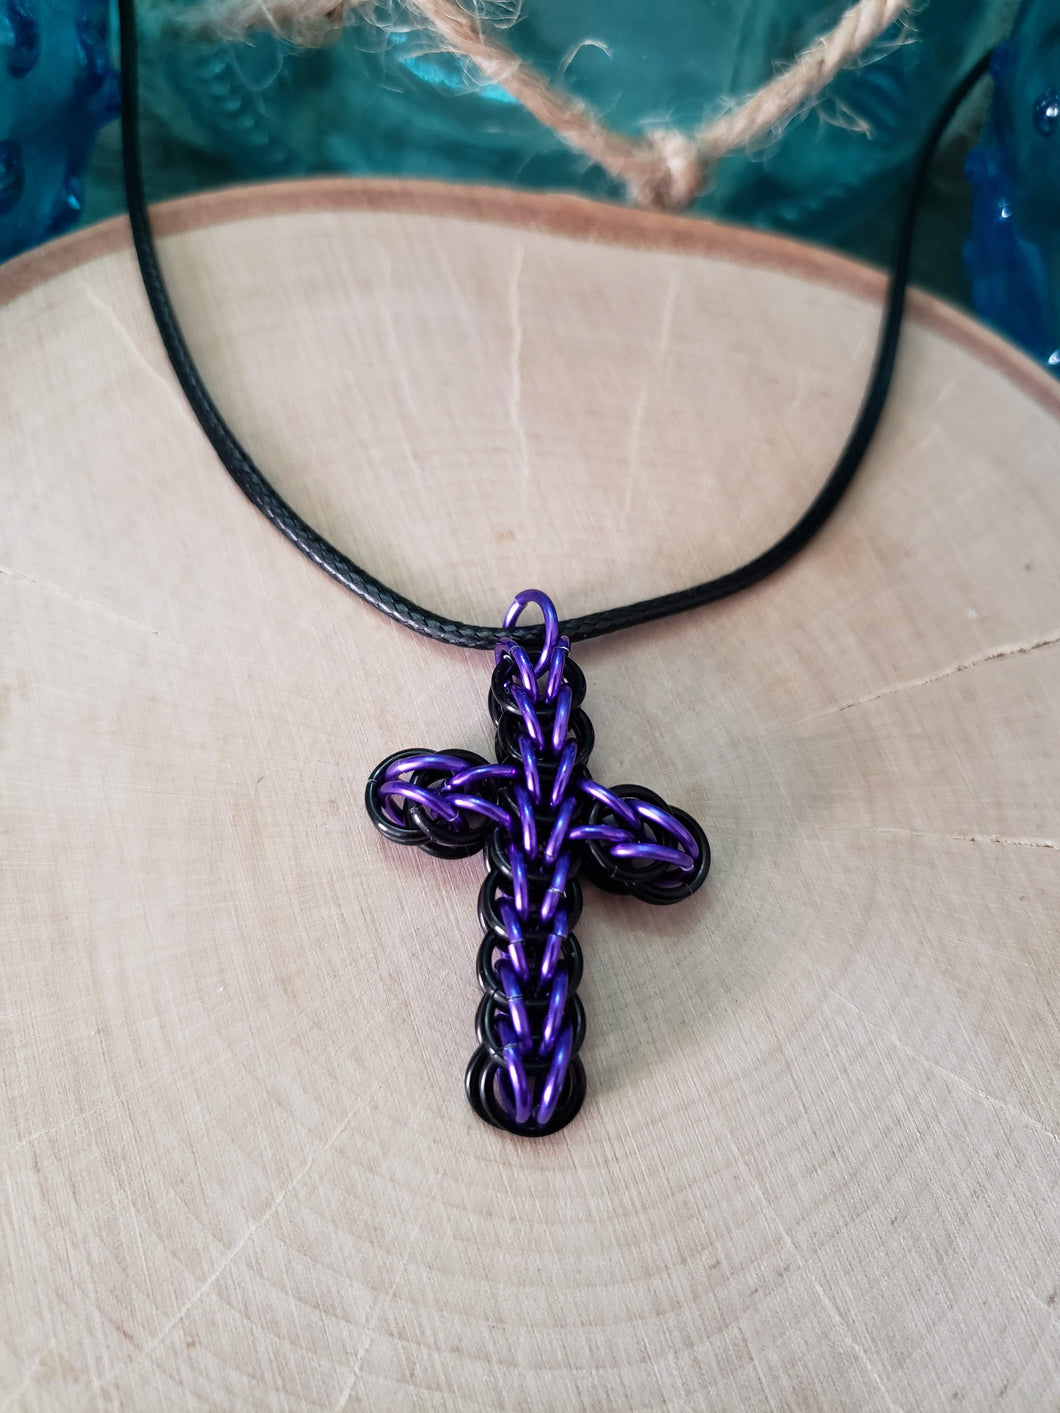 Lilac and Onyx Chainmaille FullPersian Cross Necklace